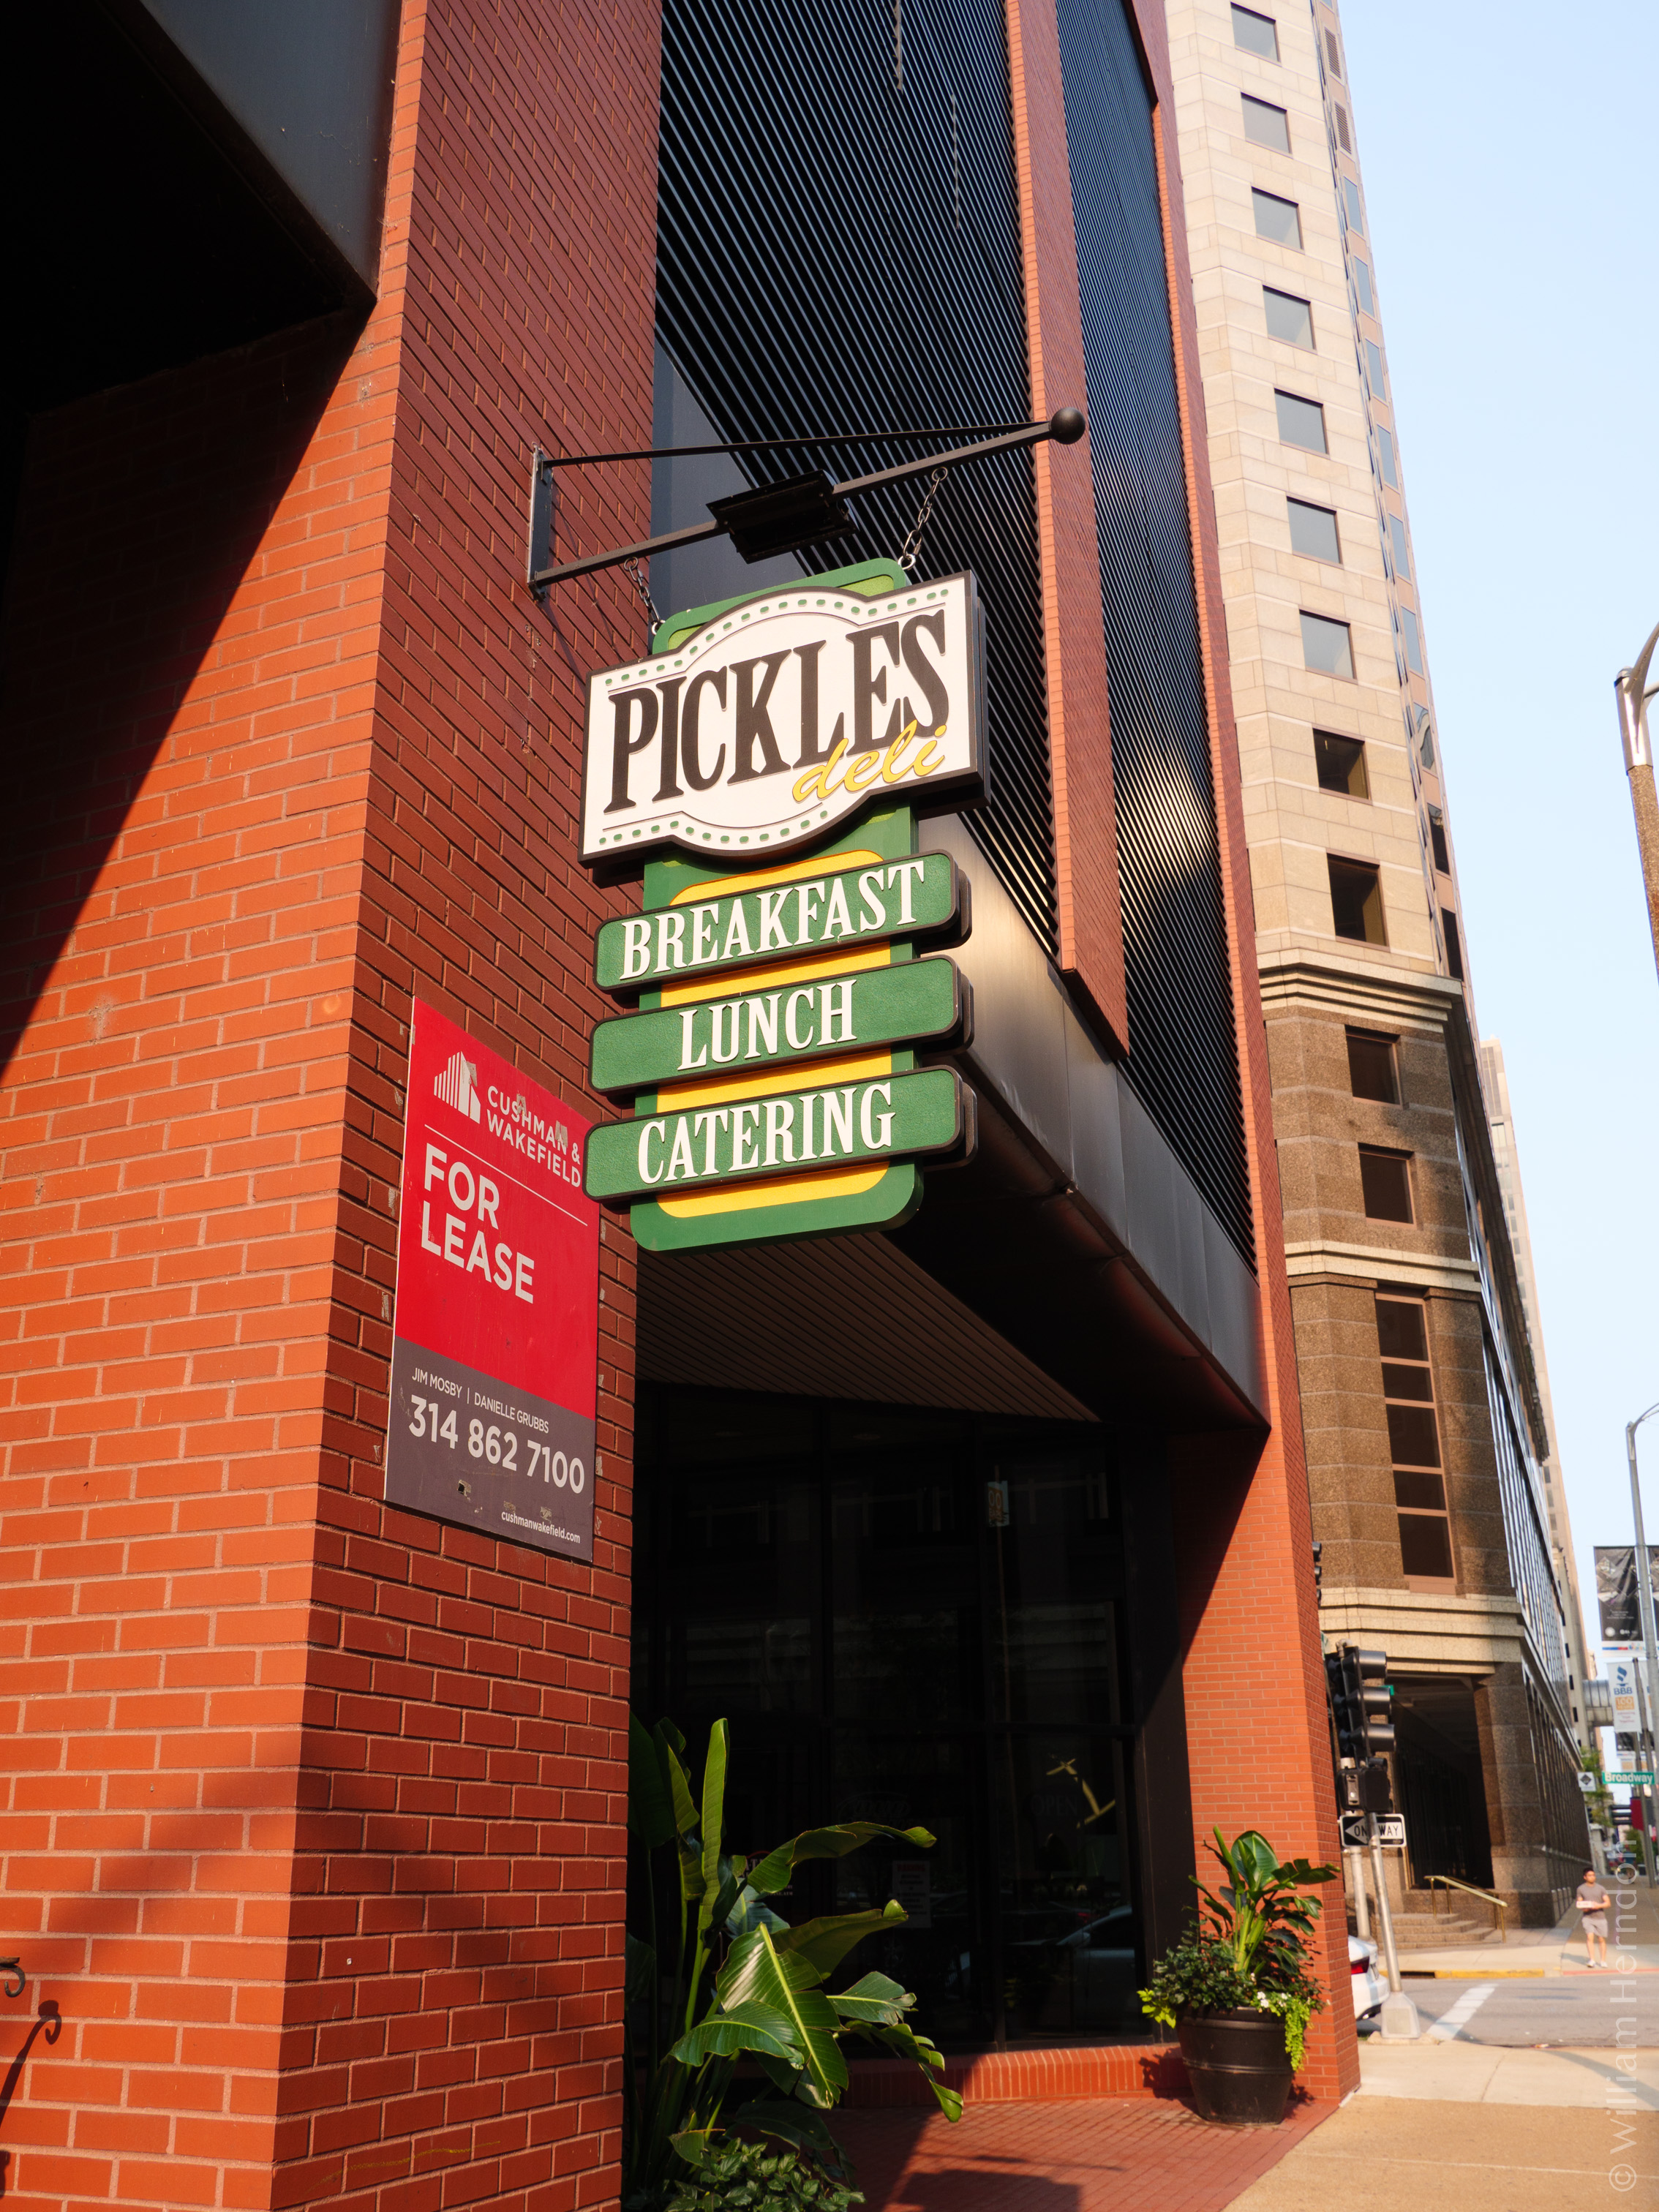 Pickles is for lease?